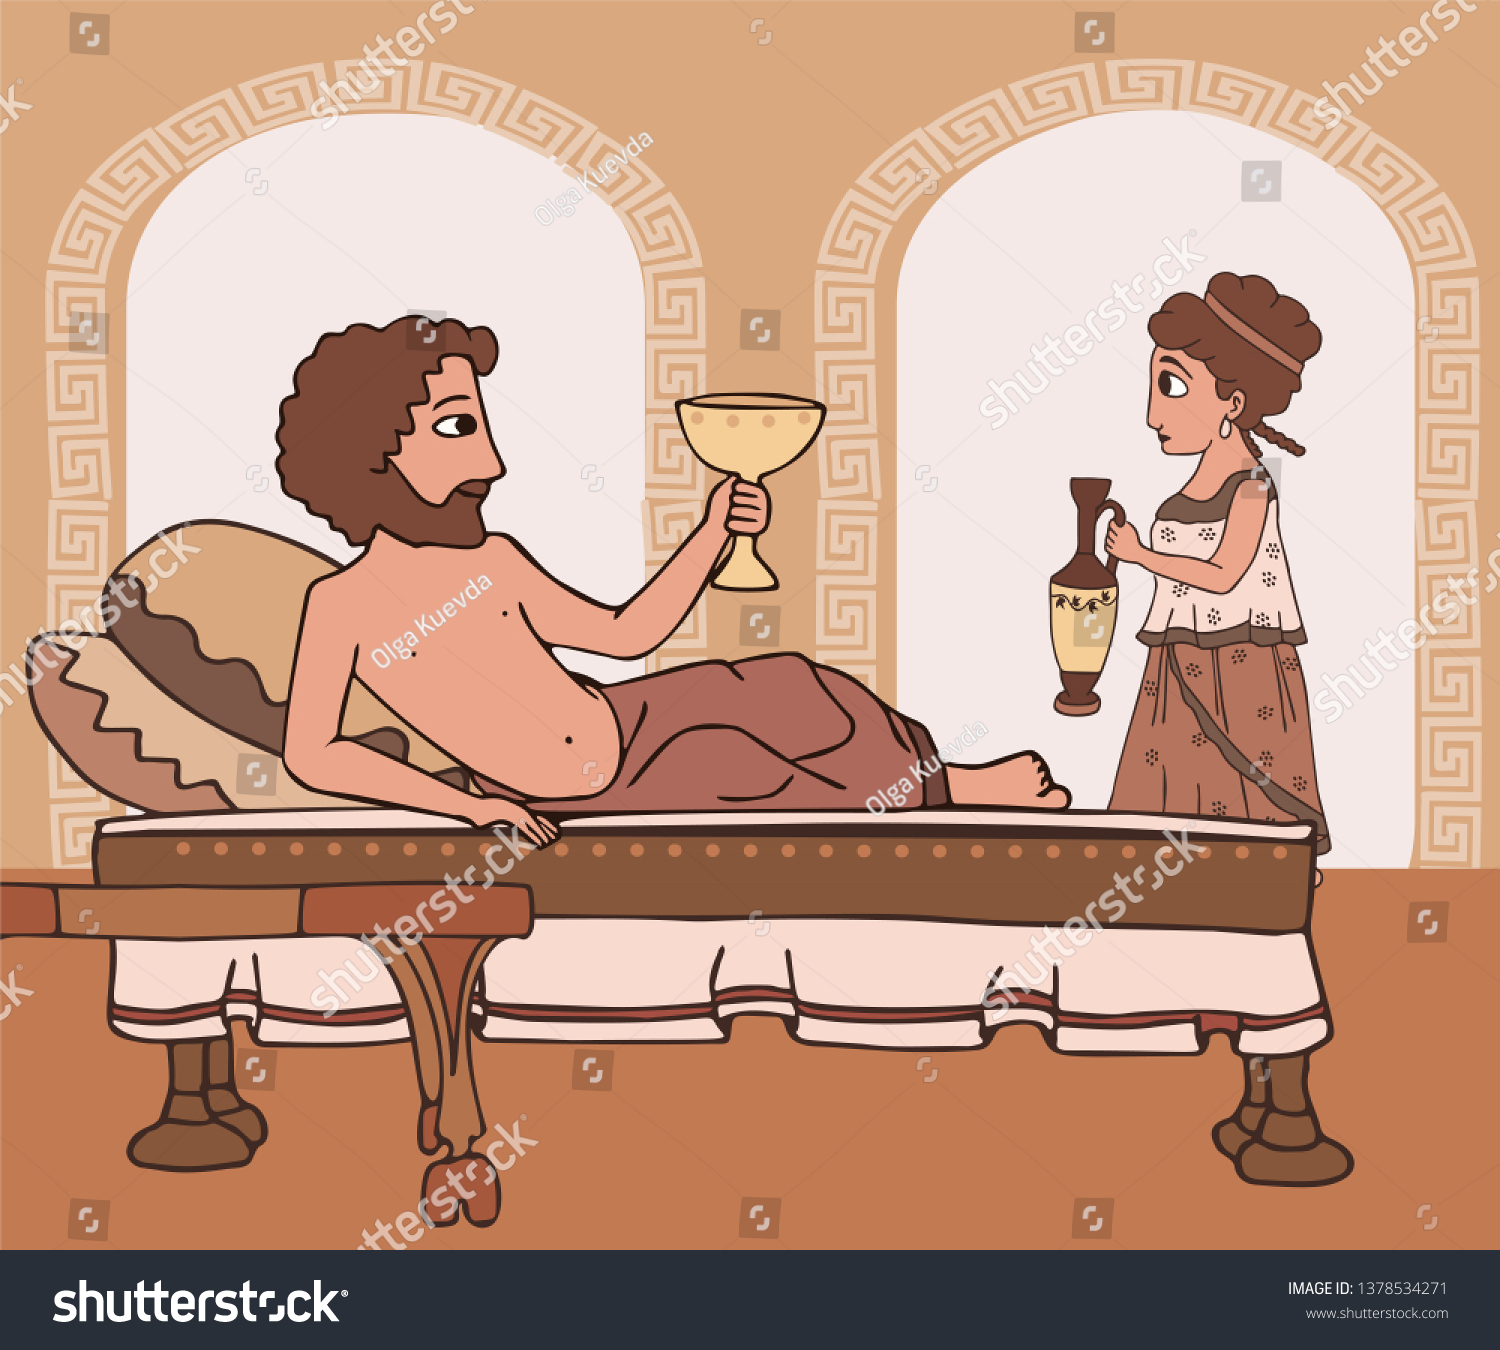 SVG of every day life in Ancient Greece, man drinking wine lying on the bed, woman bringing jug, vector cartoon historic scene svg